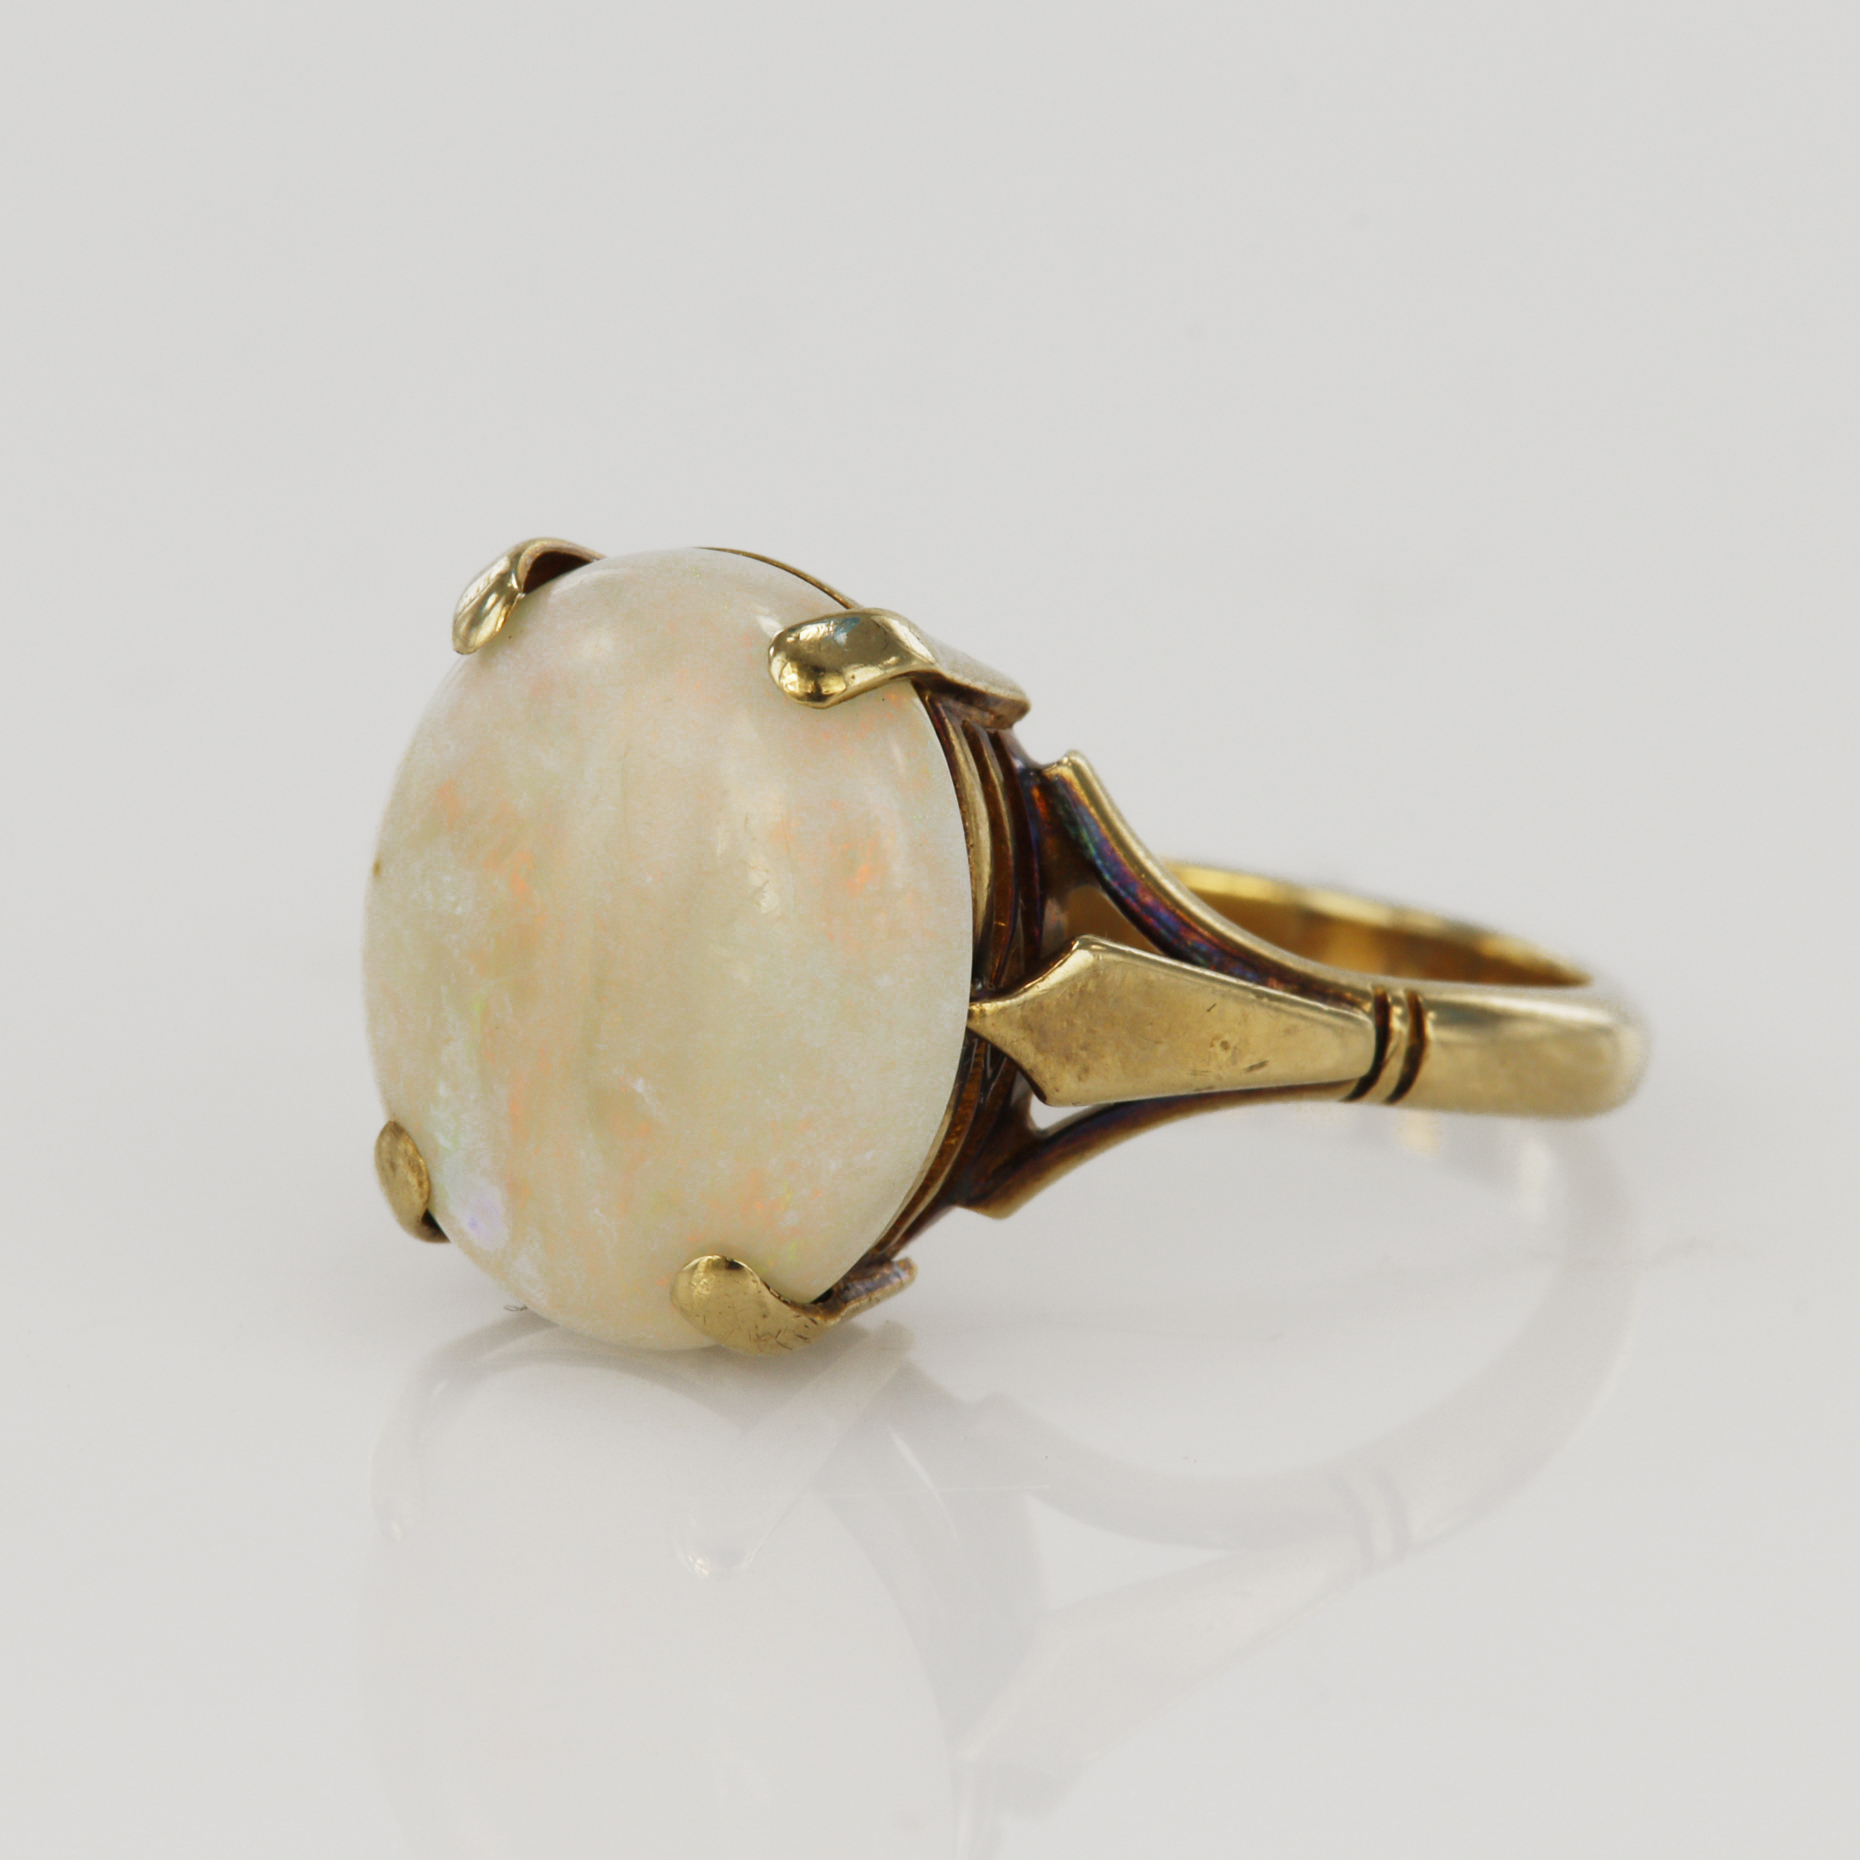 Yellow gold (tests 9ct) opal cocktail ring, opal measures 12.8 x 11mm, finger size L/M, weight 3.